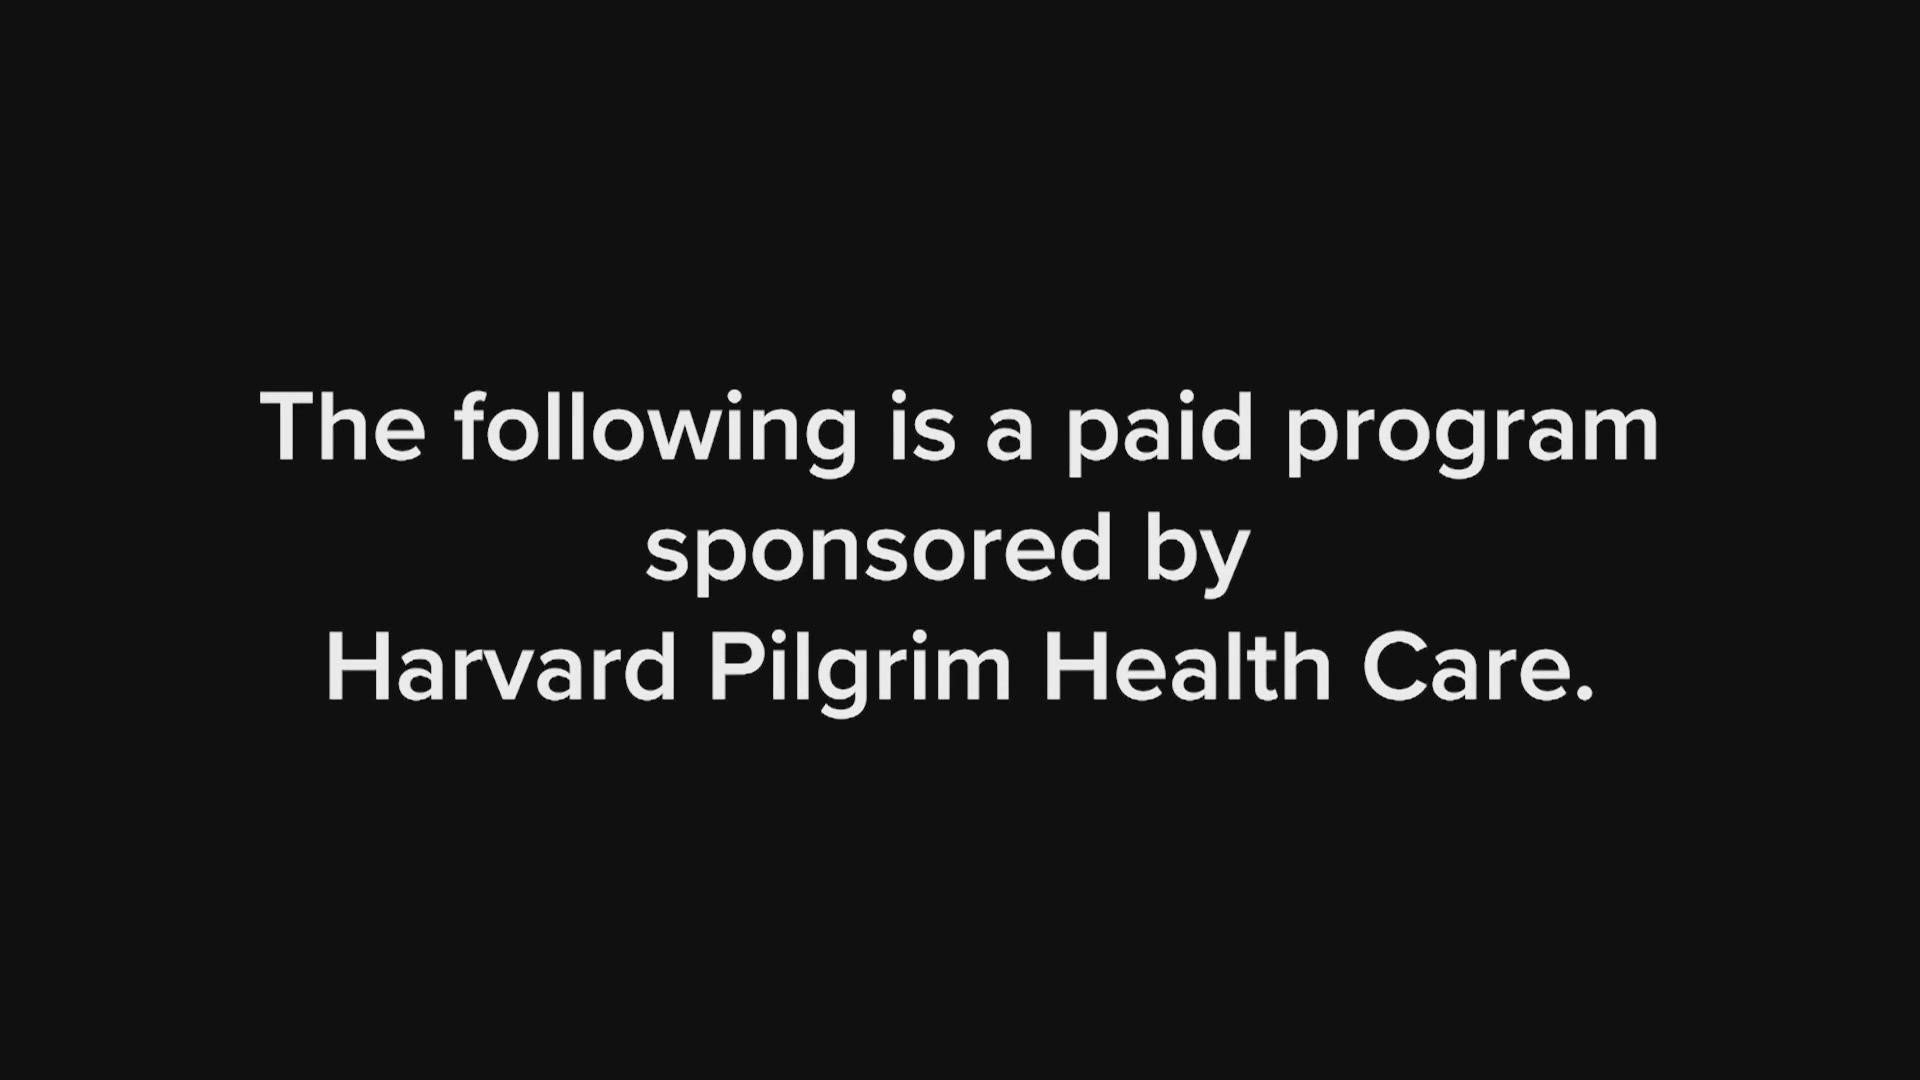 Harvard Pilgrim Health Care is committed to keeping it's members and their communities healthy.